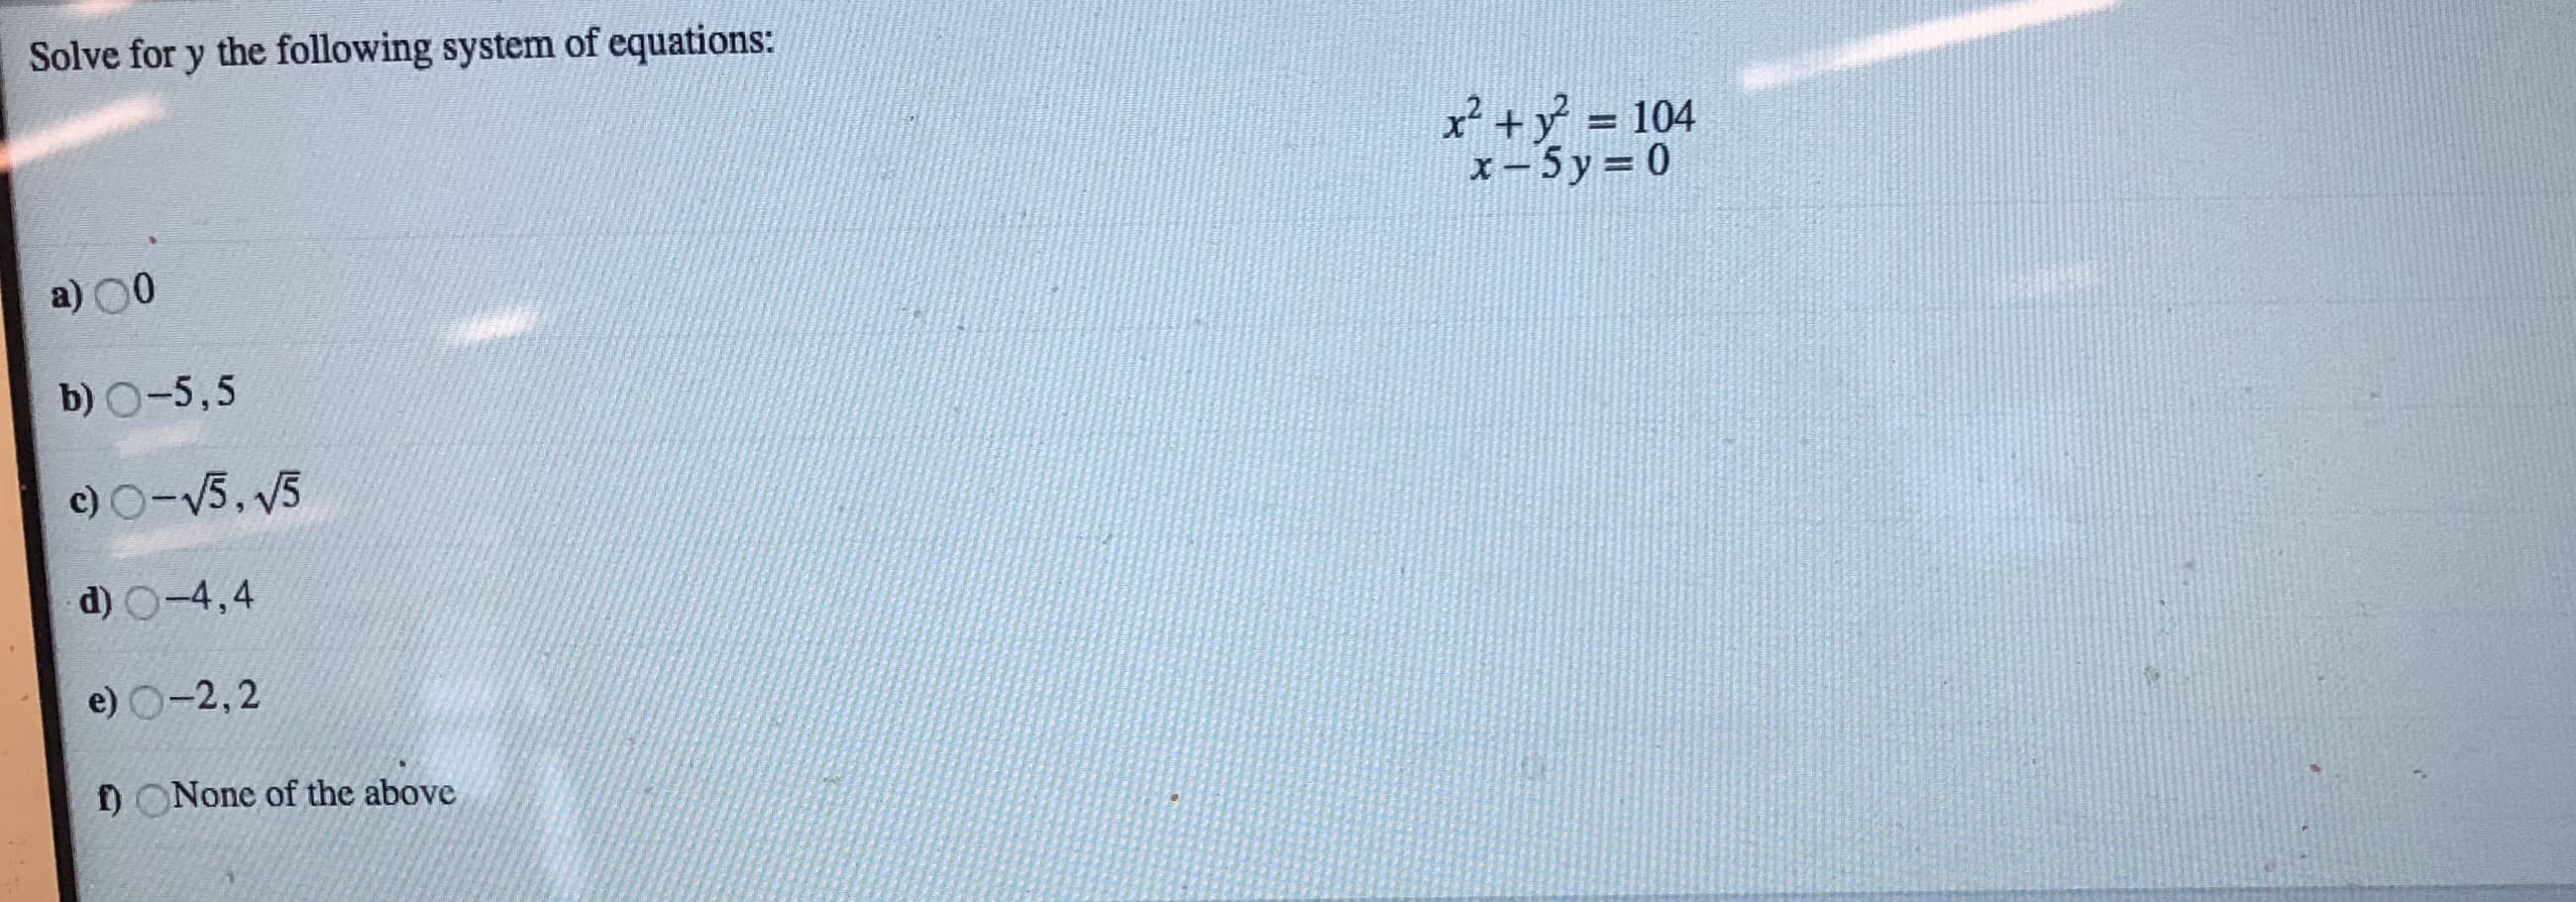 Solve for y the following system of equations:
x2+y 104
x-5 y 0
a) 00
b) O-5,5
c) O-5, 5
d) O-4,4
e) O-2,2
f) ONone of the above
